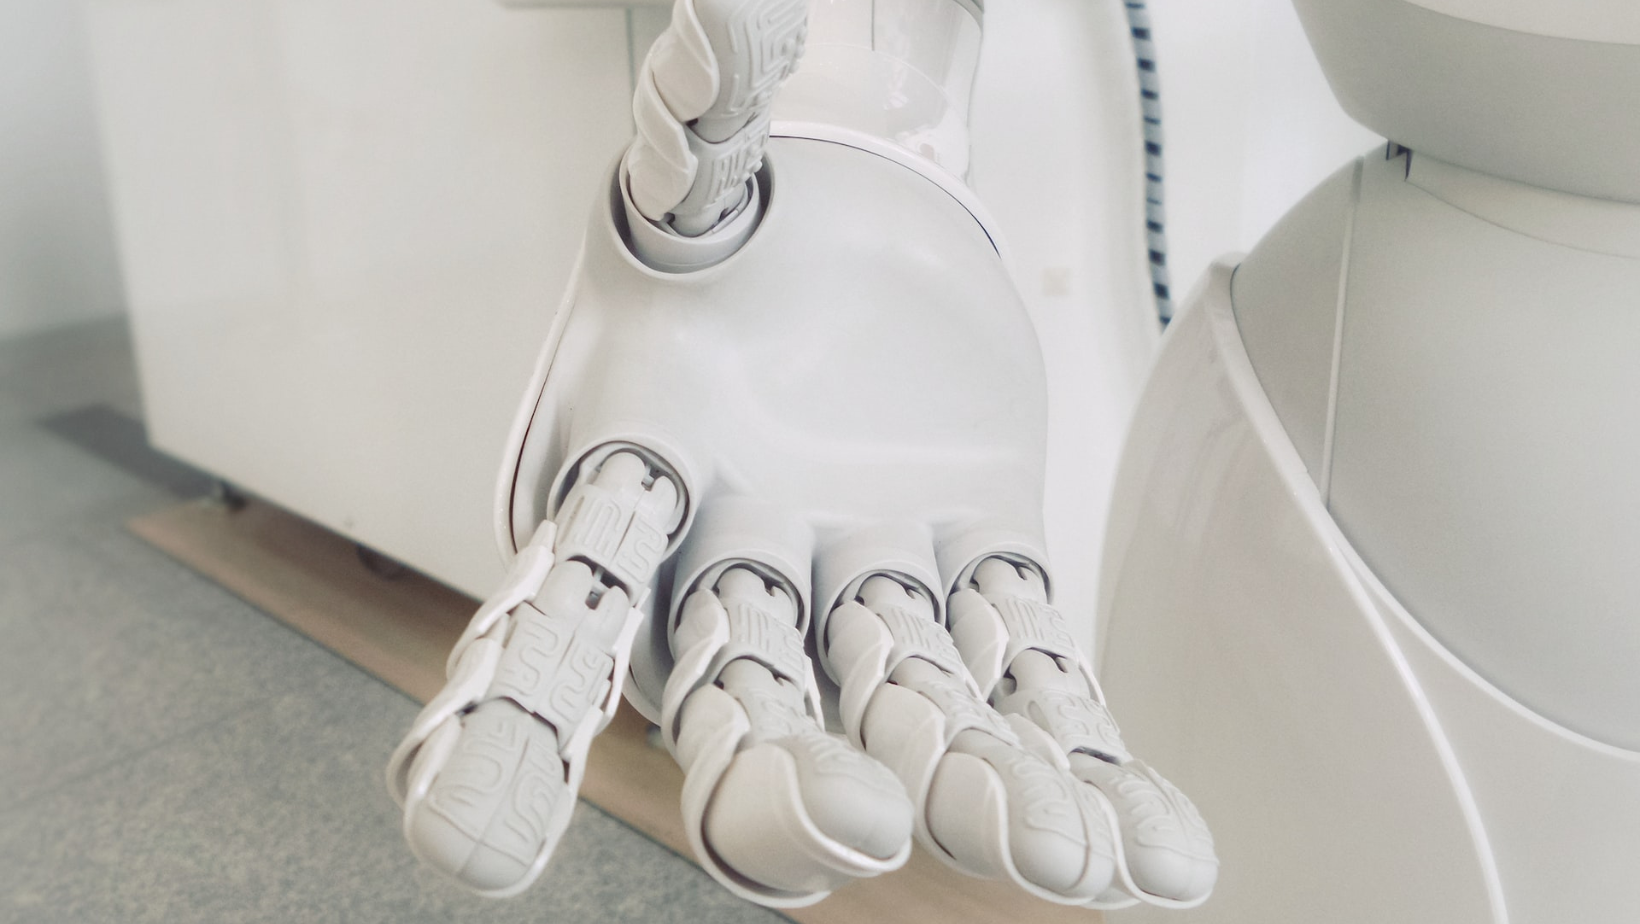 An upturned white robot hand reaches toward the camera.